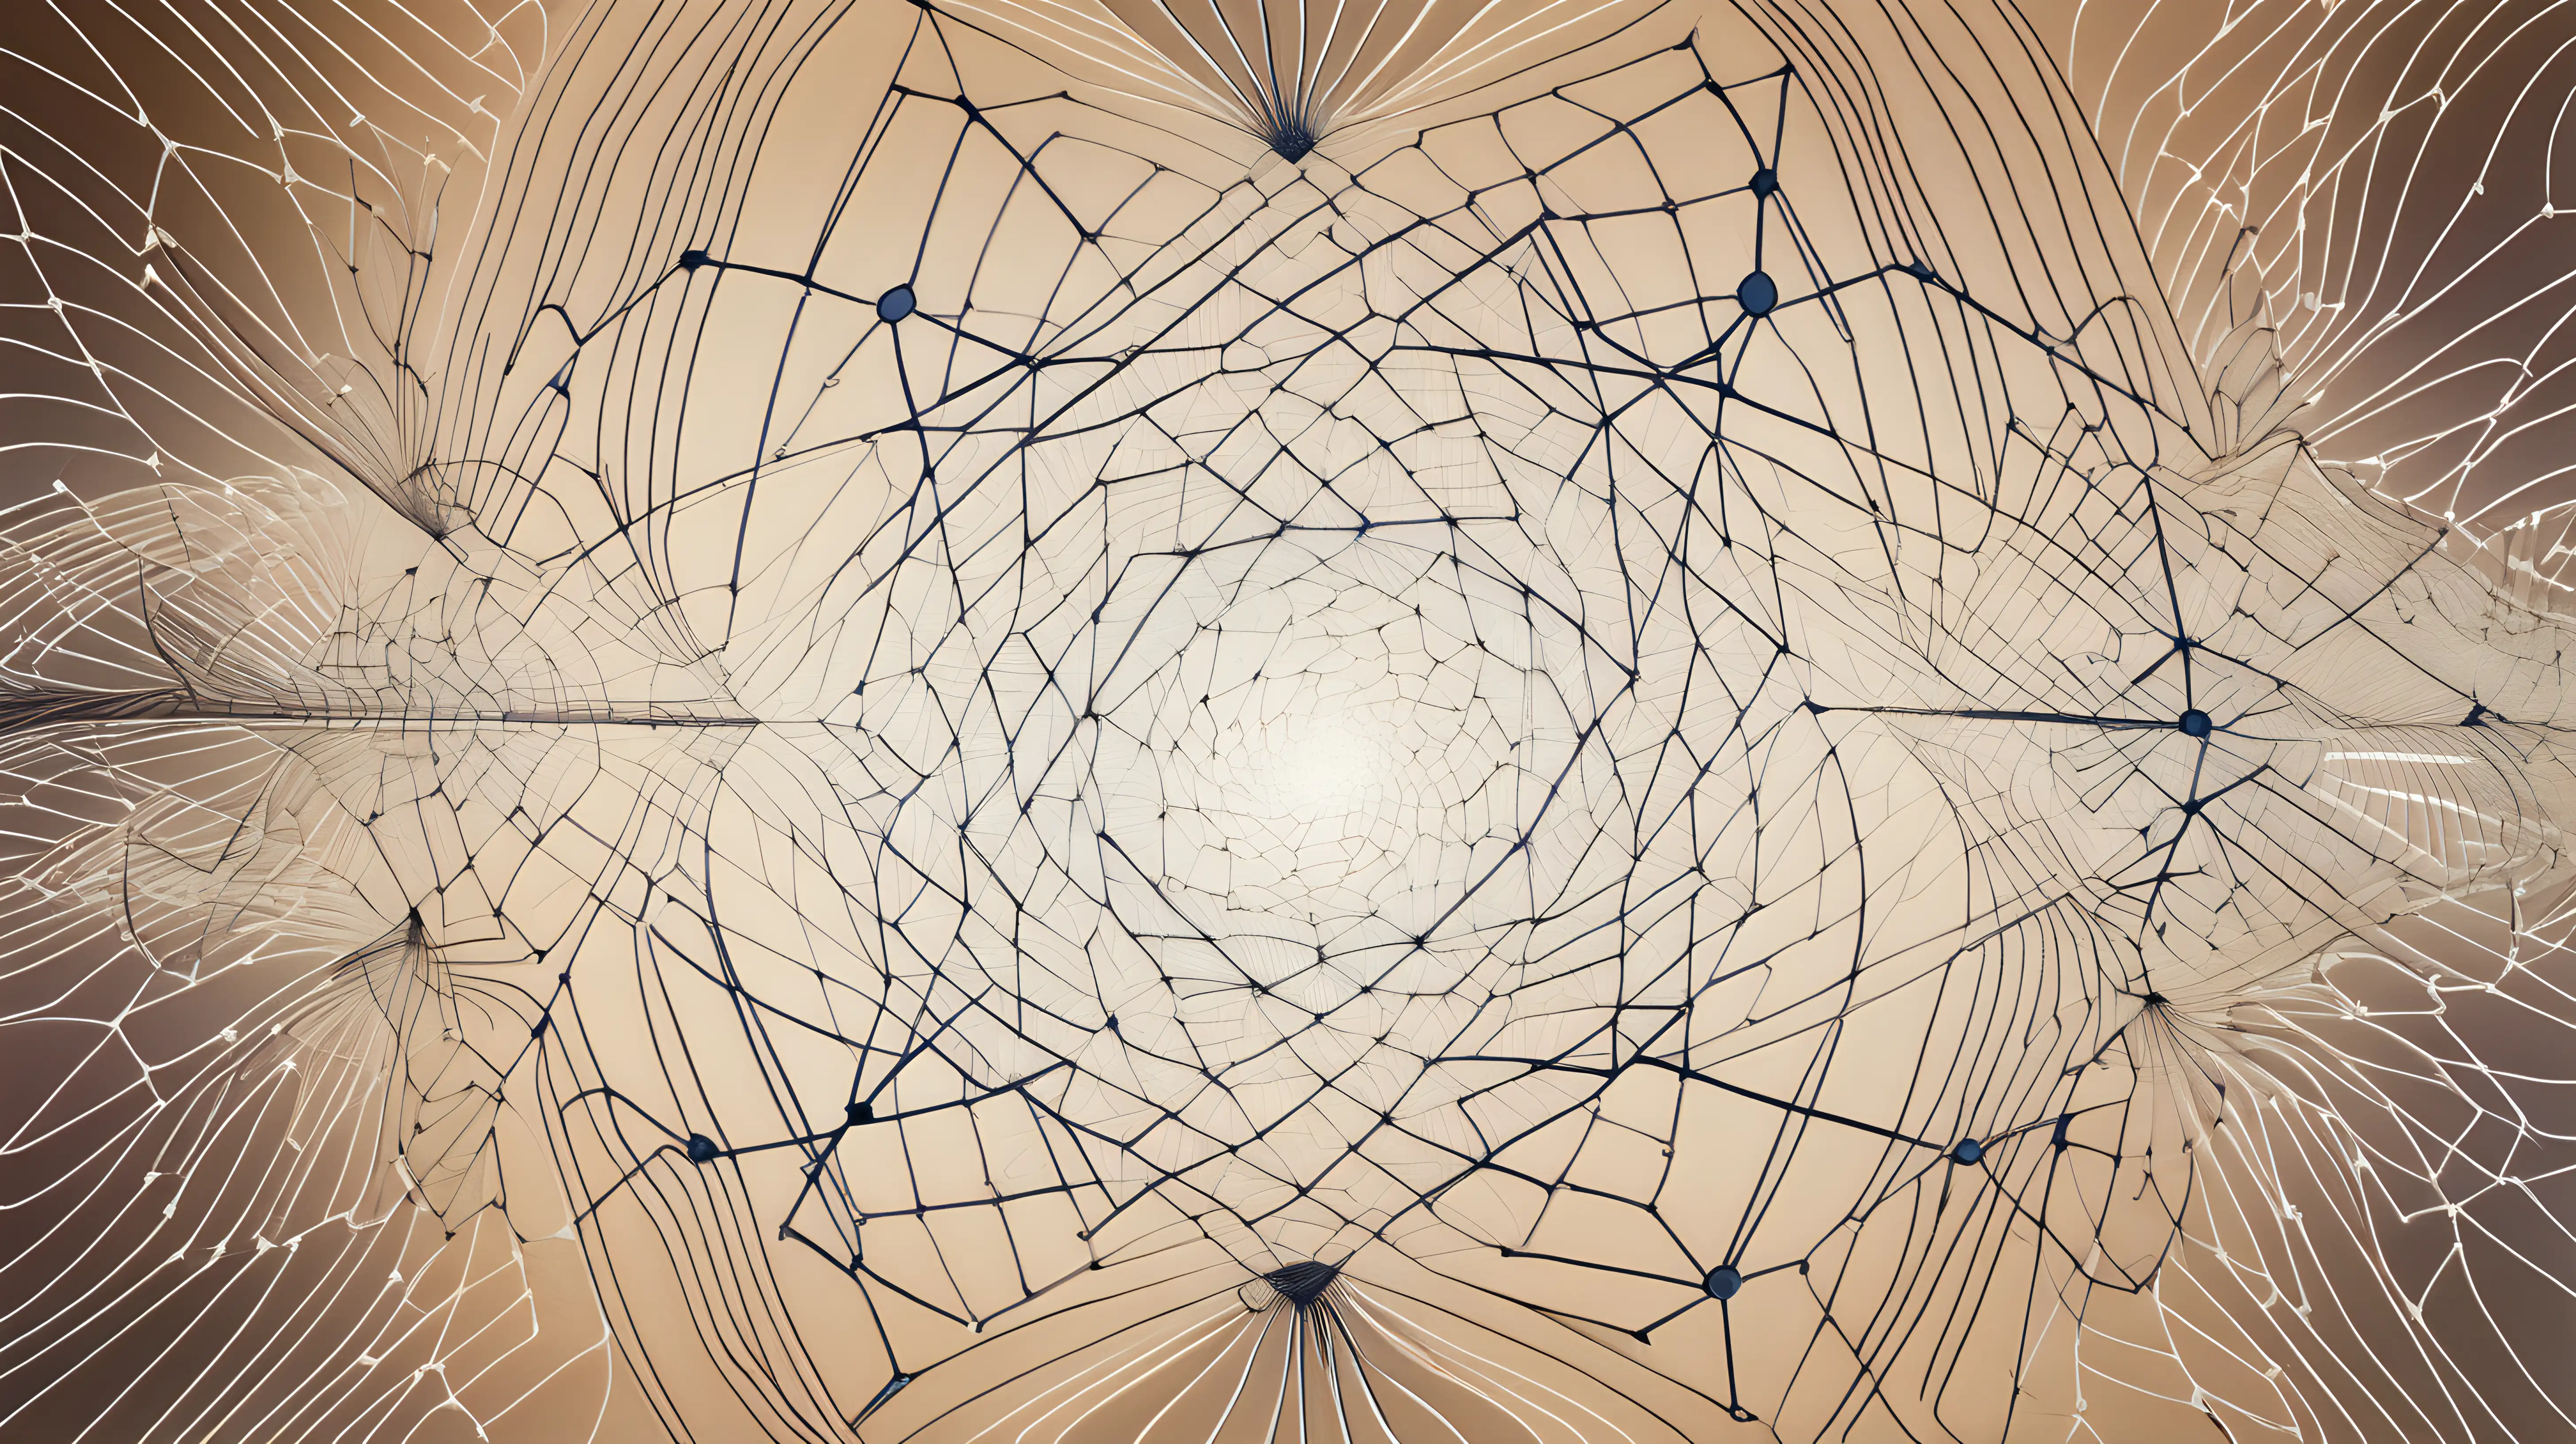 Craft a background featuring intricate fields of intersecting lines and shapes, symbolizing the complex and interconnected nature of quantum chronology.